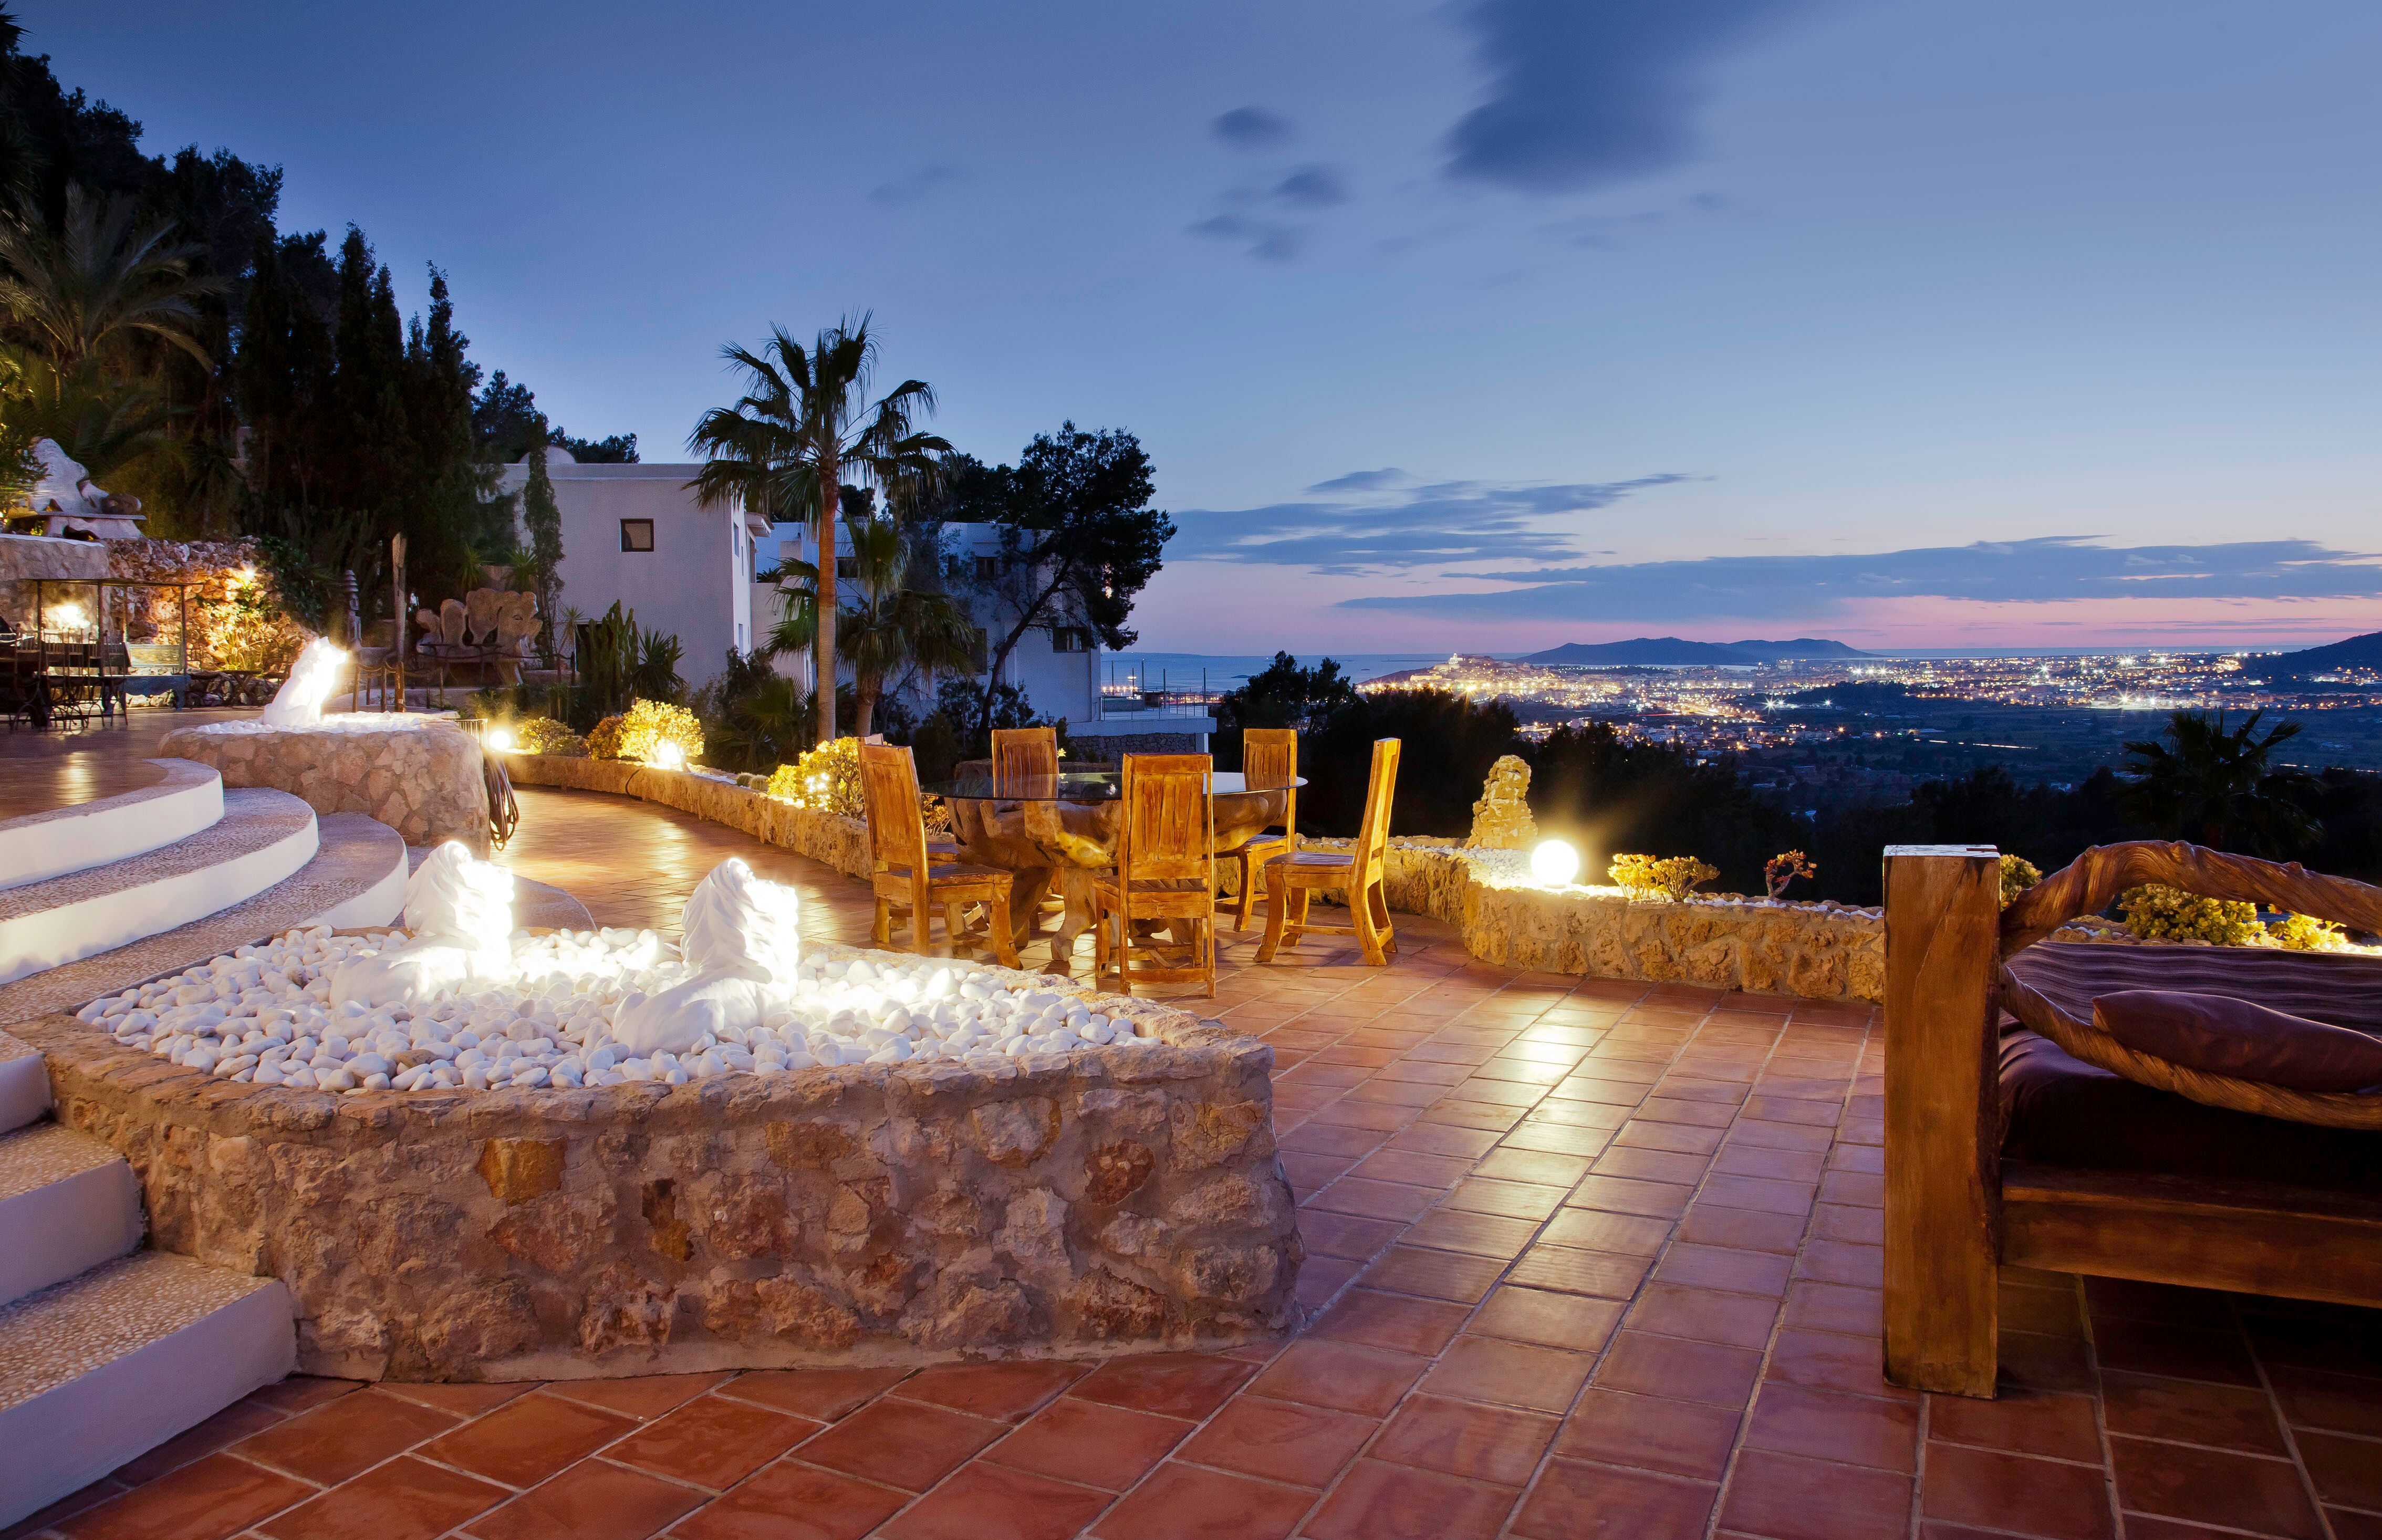 Rent a villa or rustic house in Santa Eulalia – we show you the right accommodations